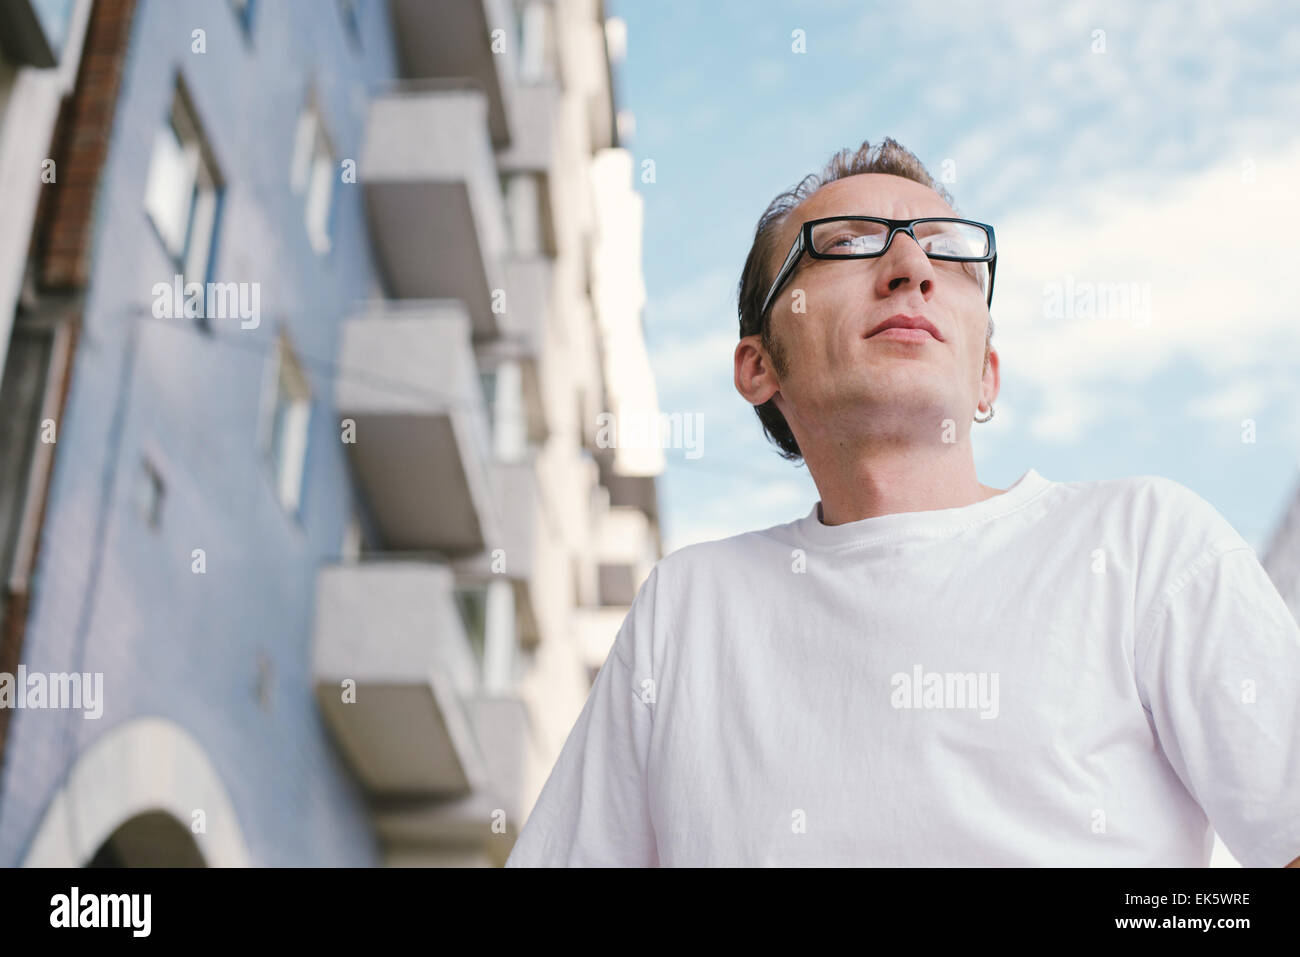 mid-aged man in front of city building. Stock Photo